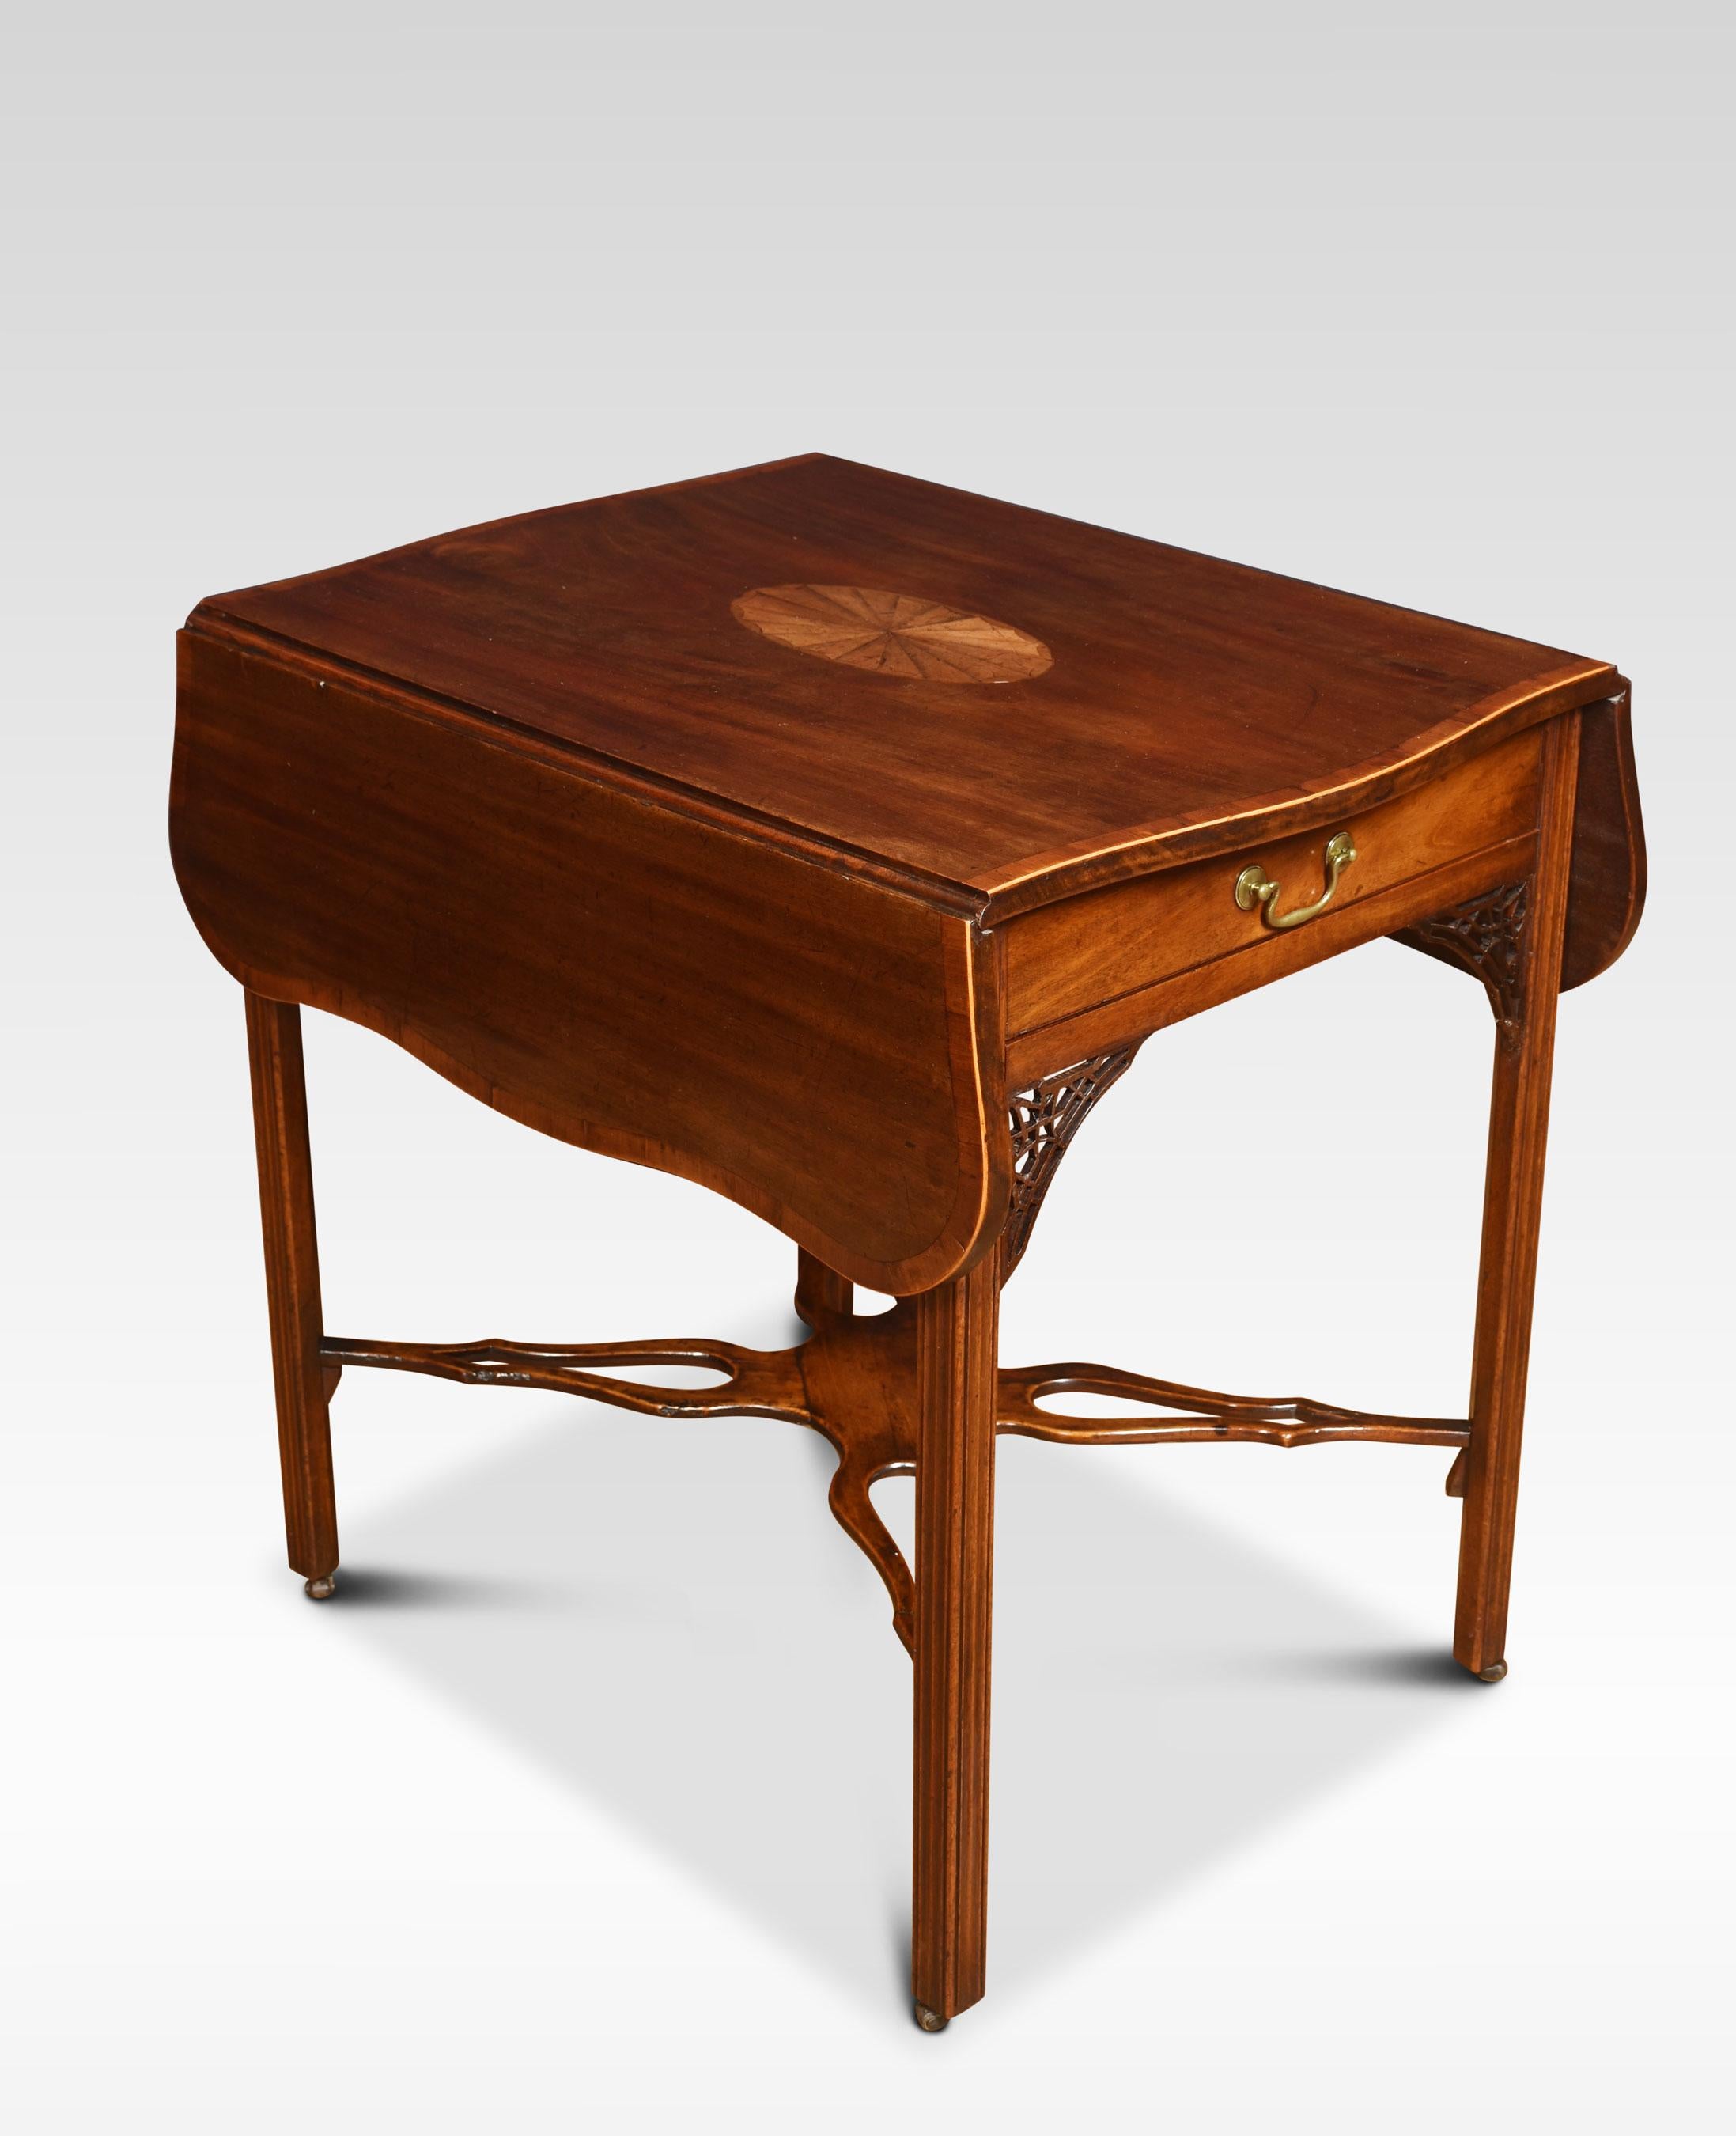 George III Pembroke table, the well-figured mahogany top with central oval inlay, incorporating two hinged flaps, above a drawer with brass handle. Raised up on square section tapering legs, terminating in casters. united by shaped